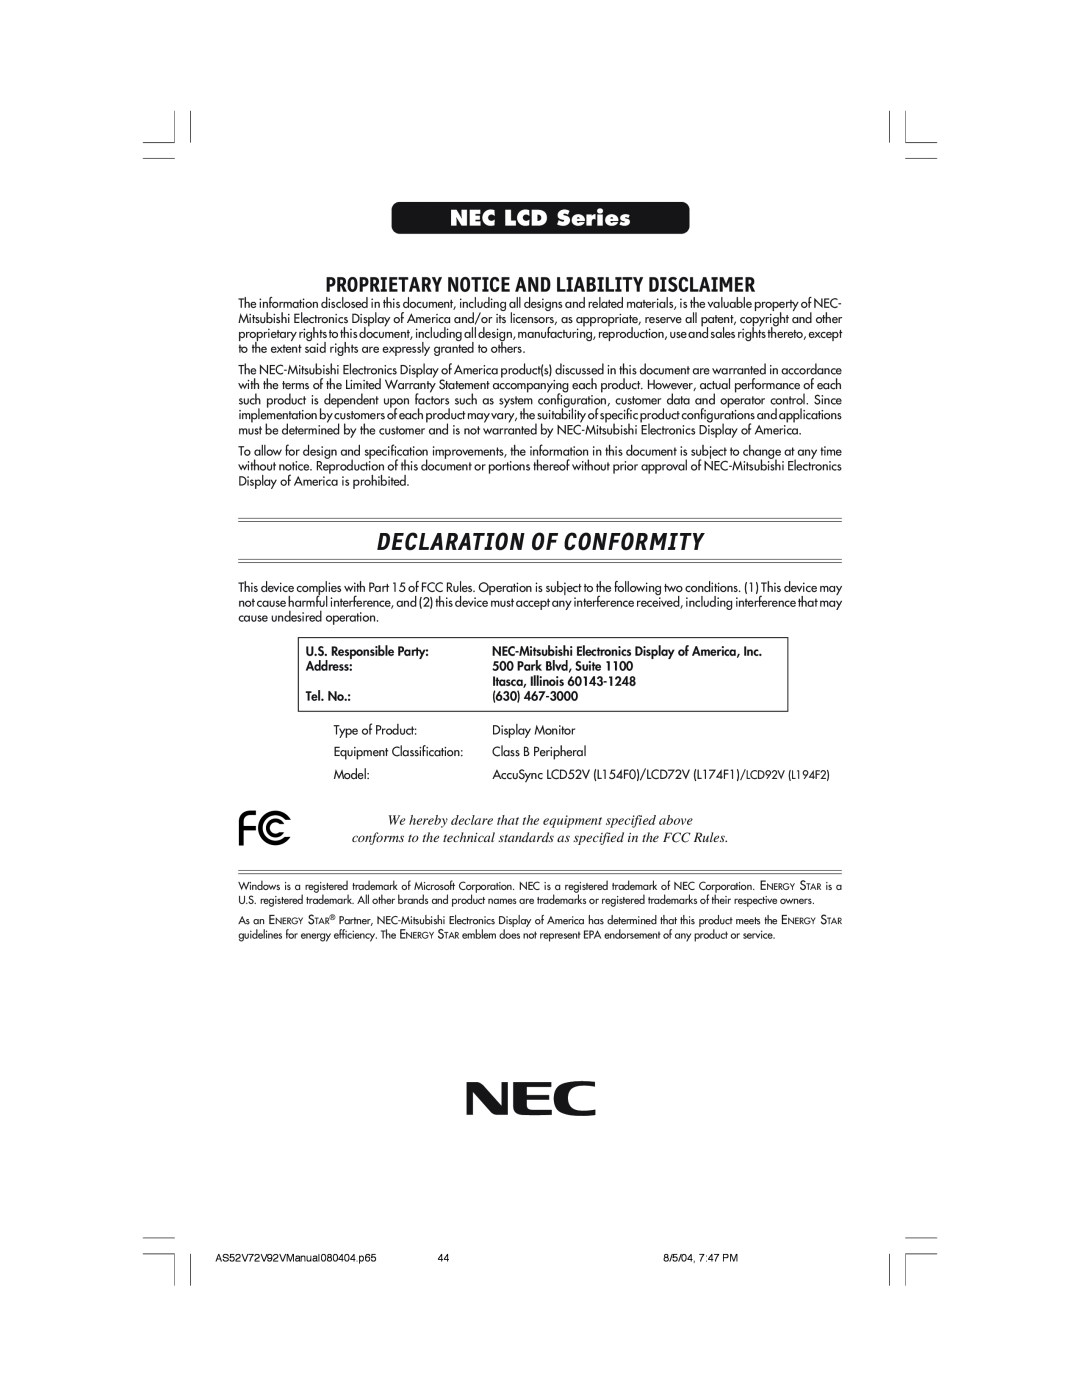 NEC LCD72V, LCD52V manual Declaration Of Conformity, NEC LCD Series, Proprietary Notice And Liability Disclaimer 